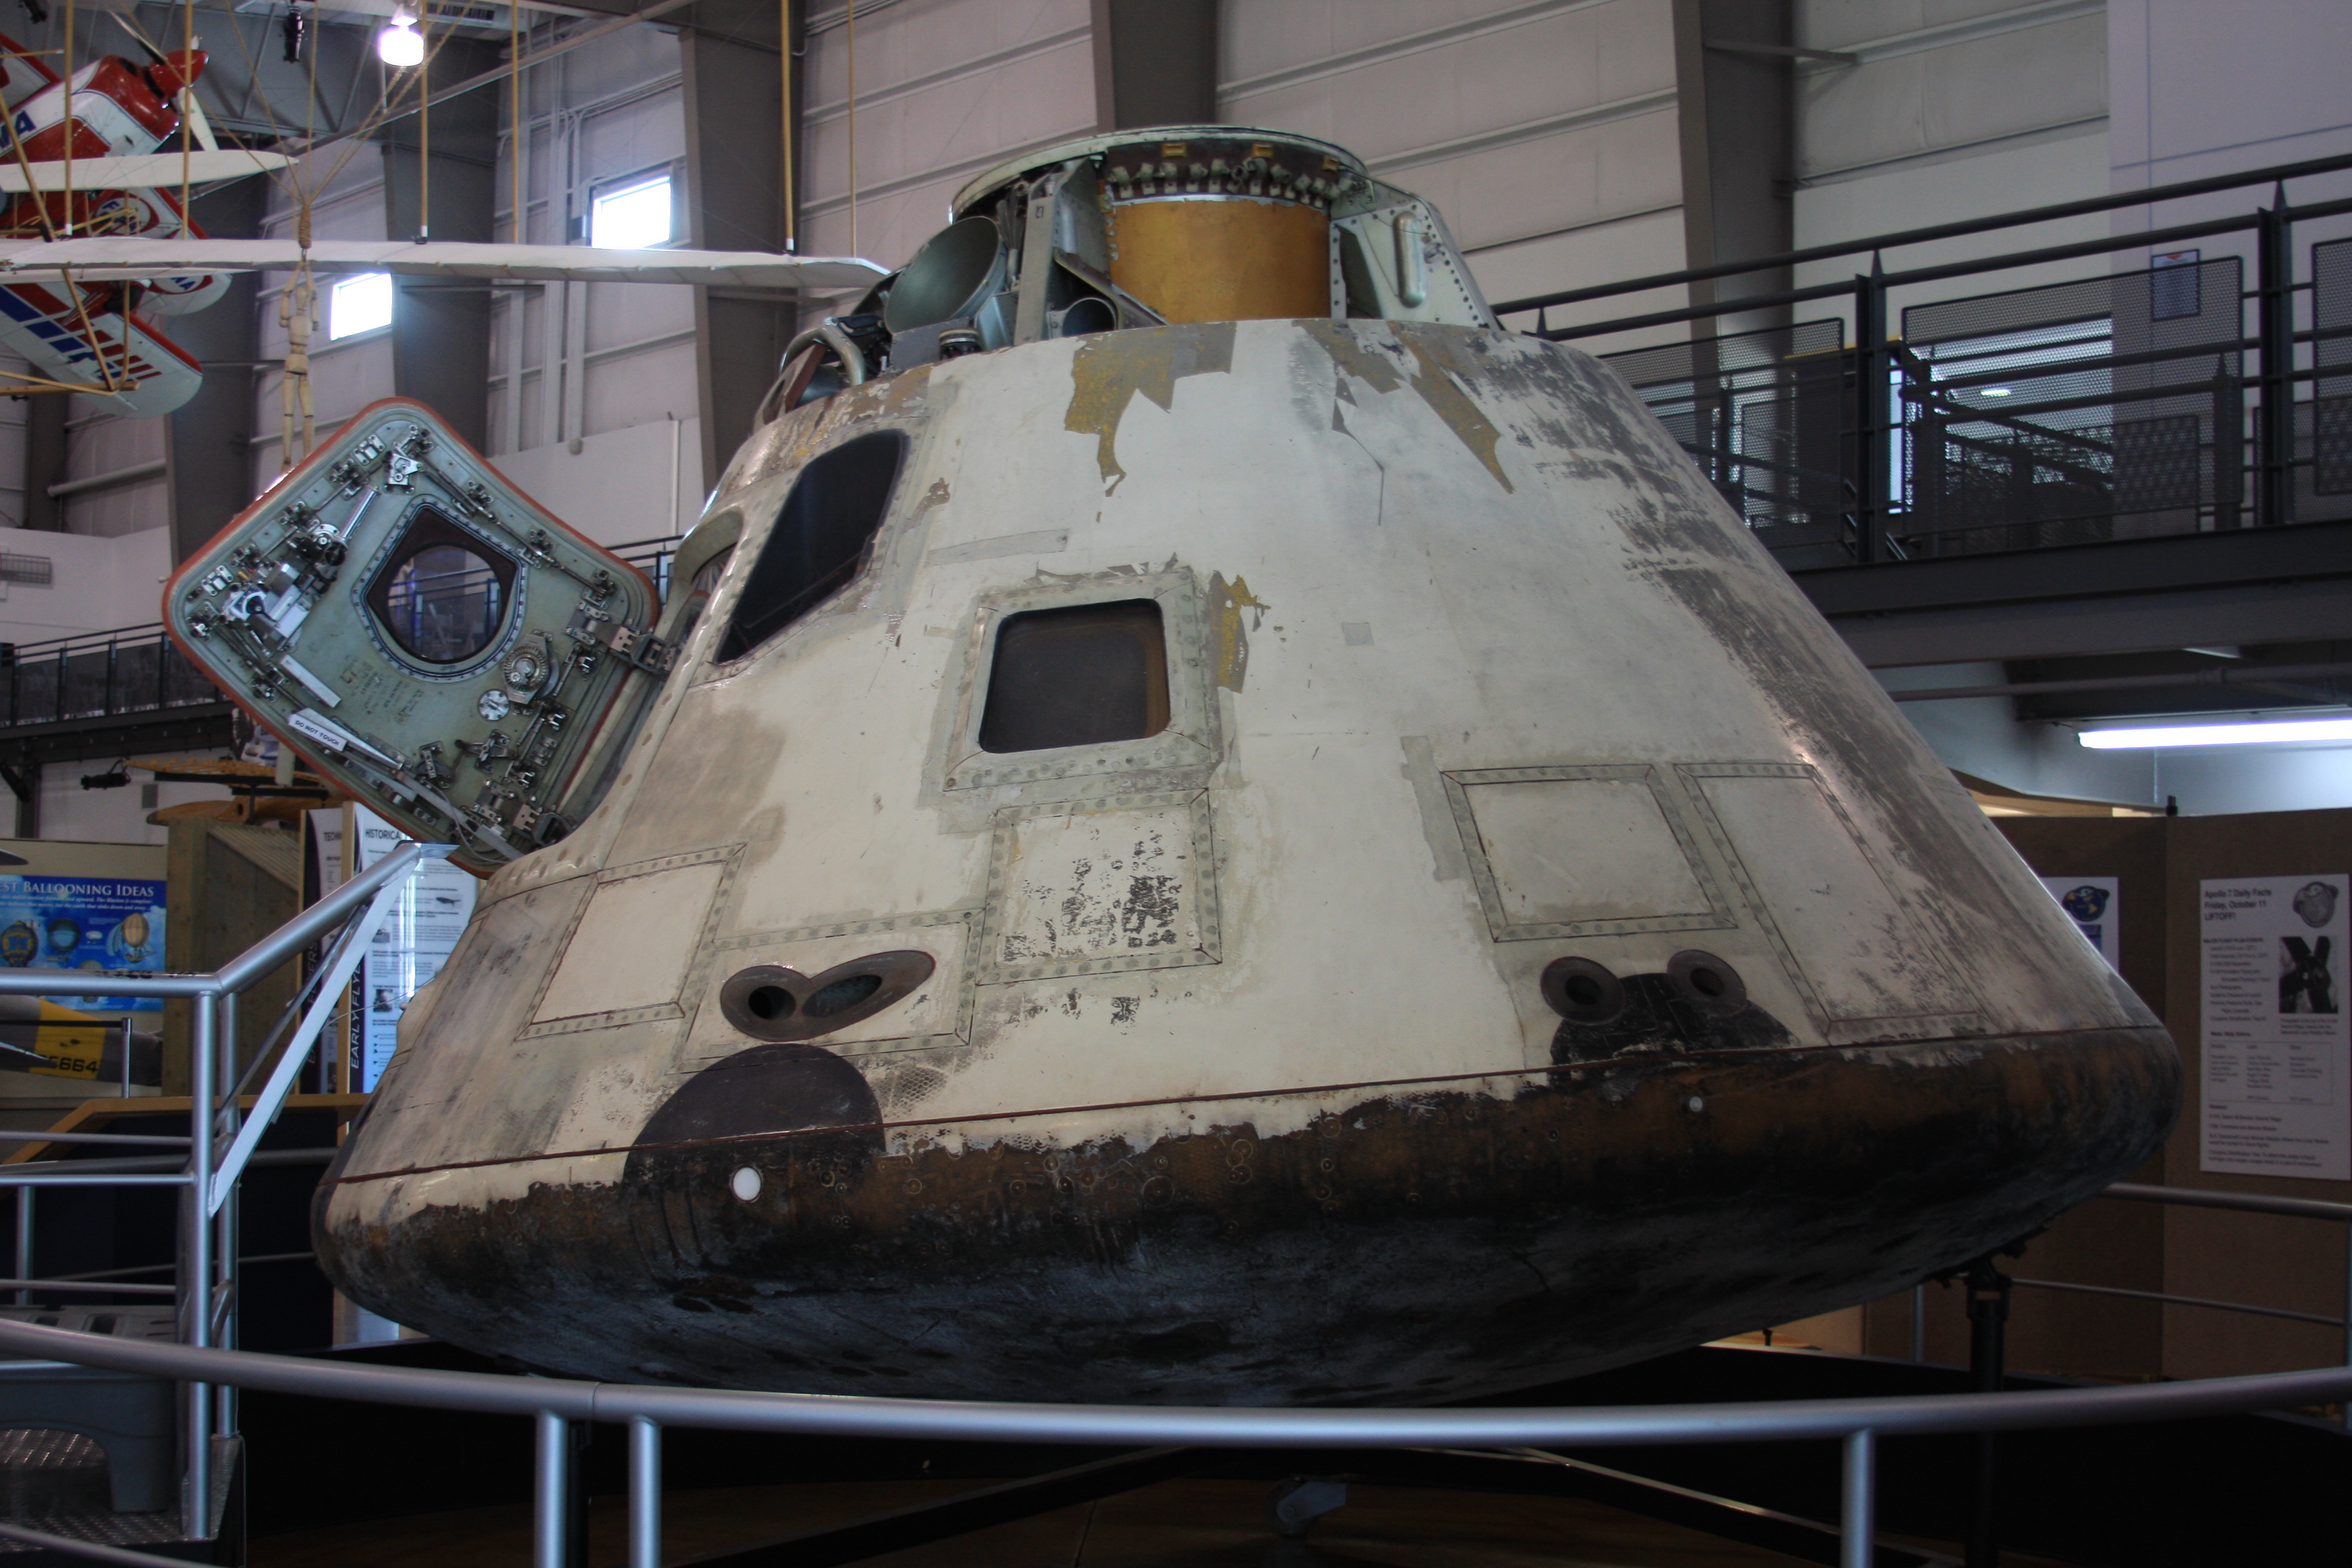 The Apollo 7 Command Module on display at the Frontiers of Flight Museum at Dallas Love Field